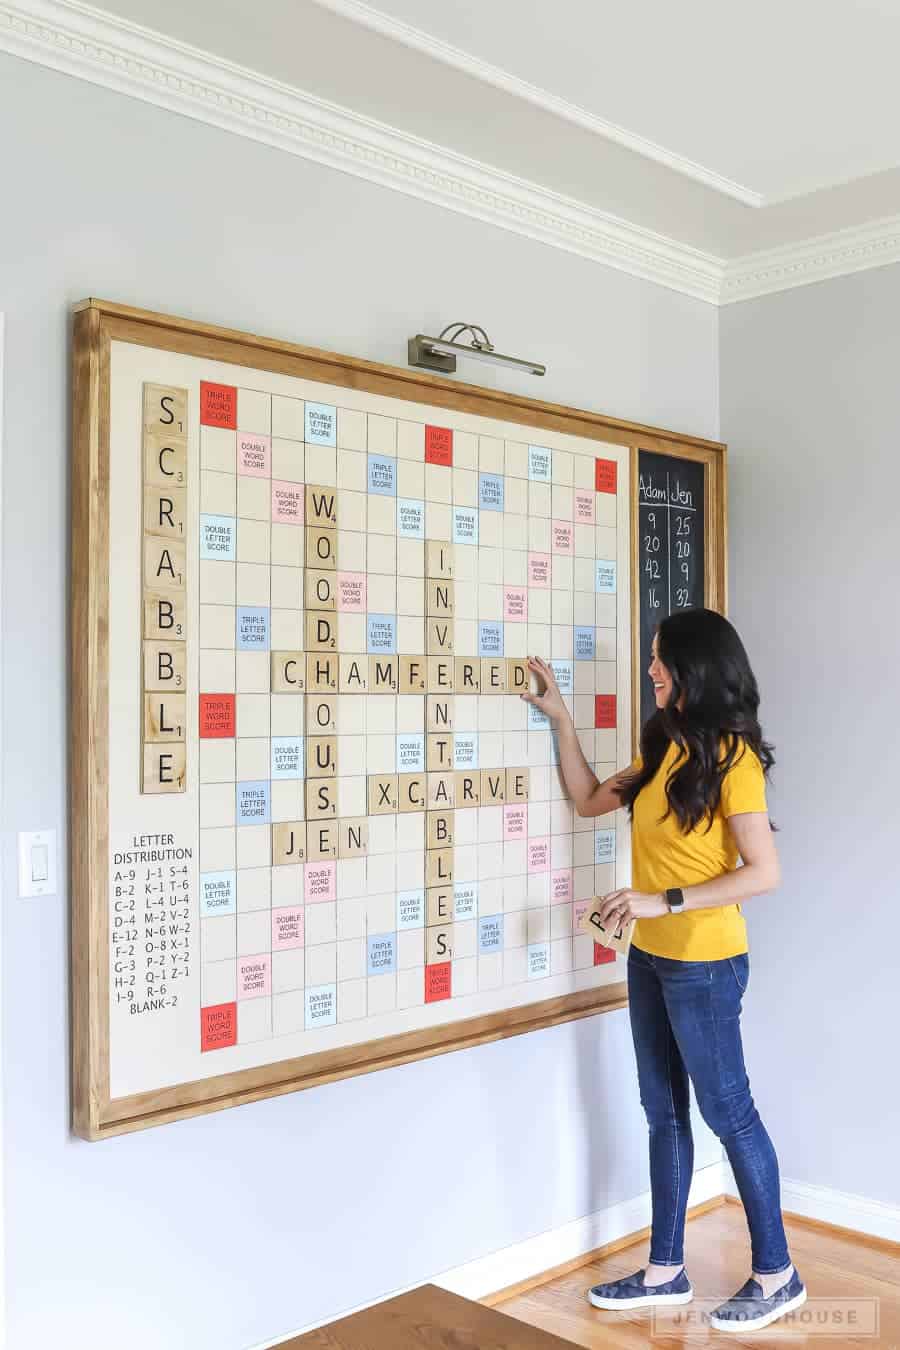 Diy Giant Wall Scrabble For Game Room From Jenwood House